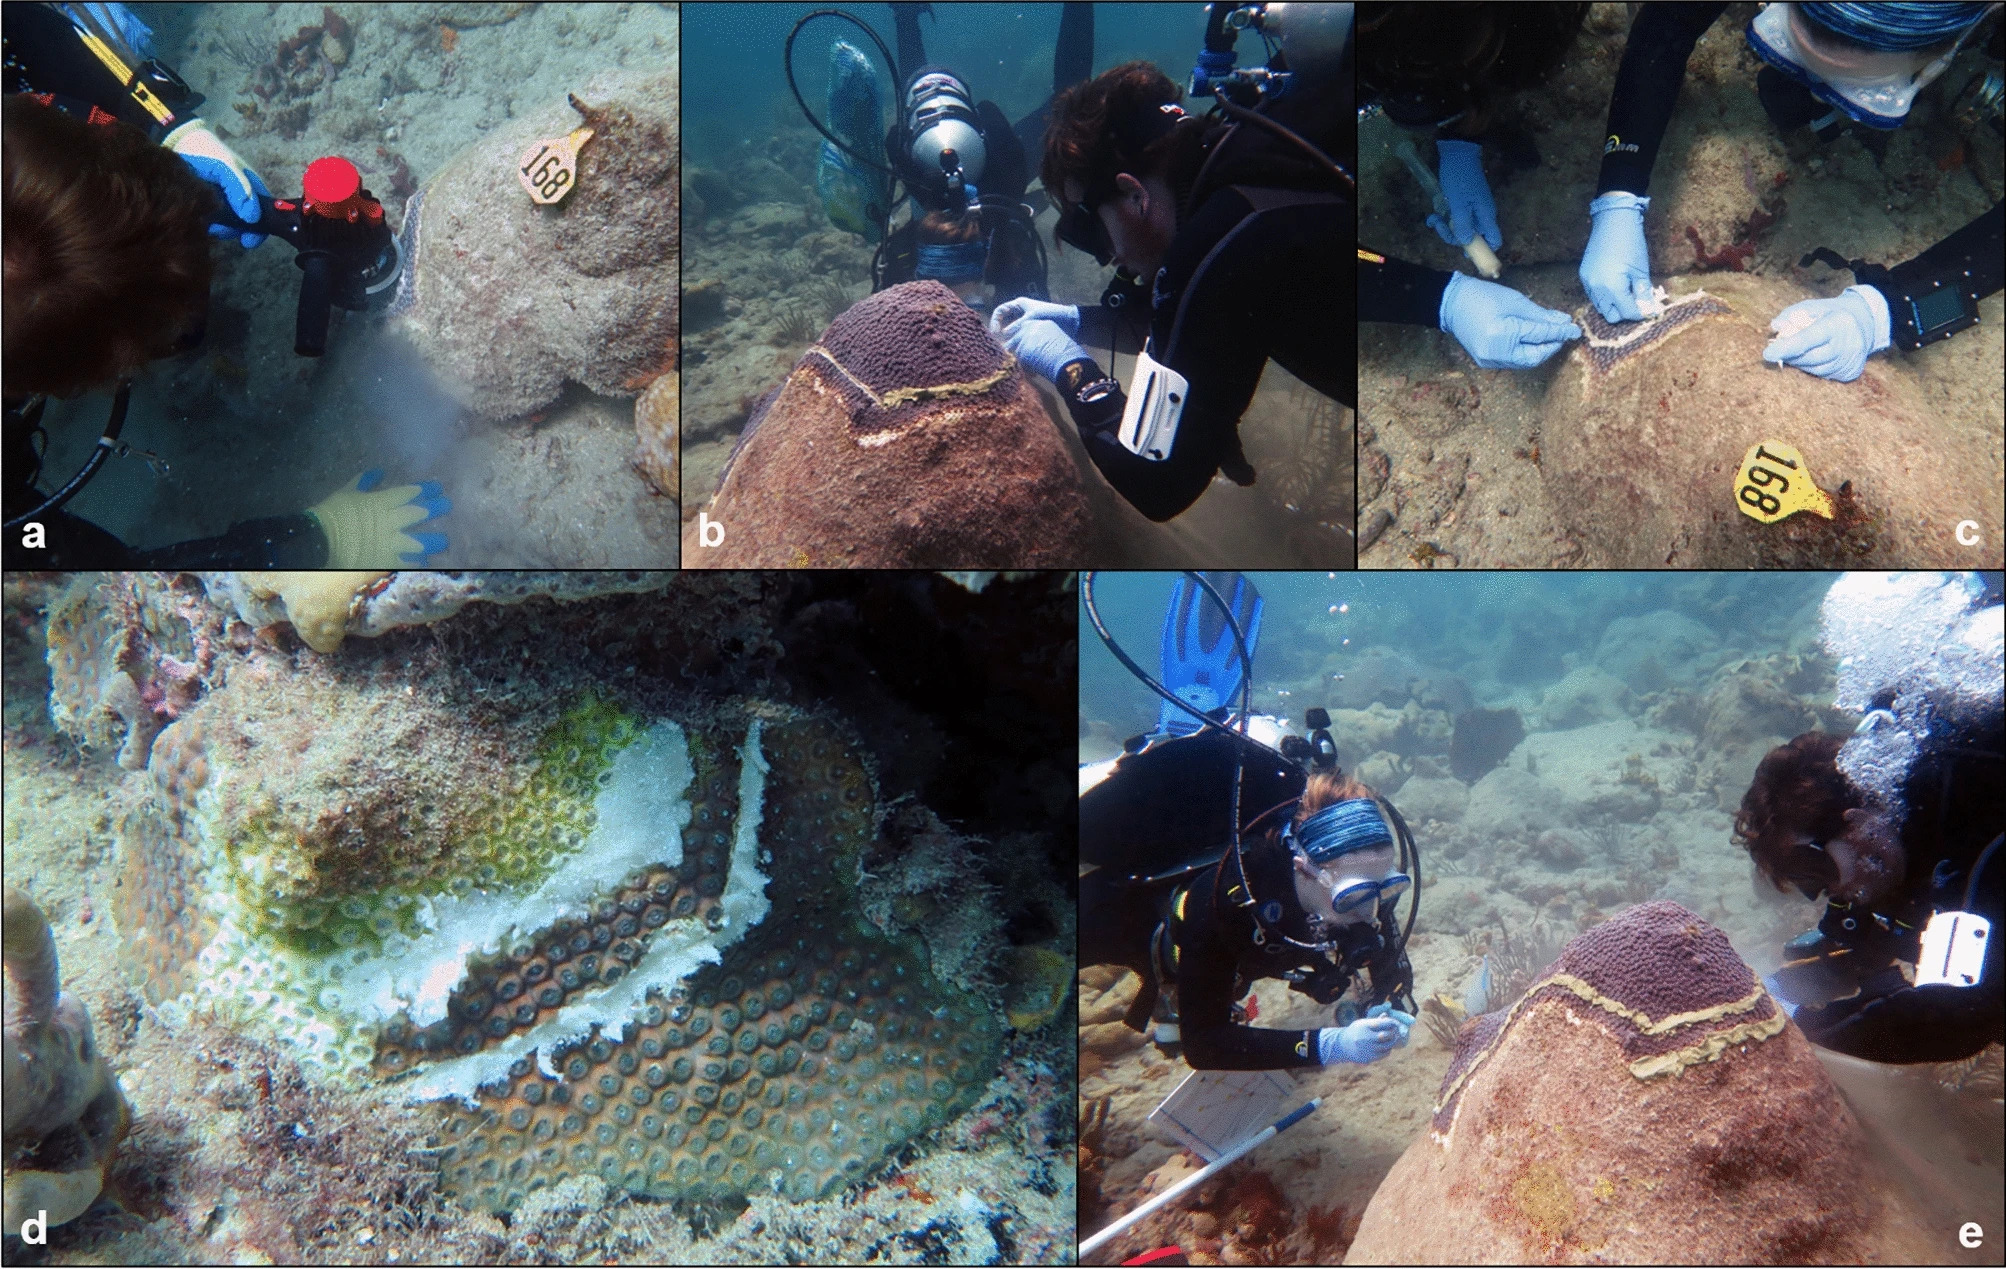 (a) Diver creating a trench around the SCTLD lesion using an angle grinder. (b) Filling a trench with the chlorinated epoxy treatment. (c) Filling a trench with the Base 2B plus amoxicillin mixture. (d) A SCTLD-affected coral colony that has been treated with the Base 2B plus amoxicillin mixture. (e) A SCTLD-affected coral colony partially treated with the chlorinated epoxy.